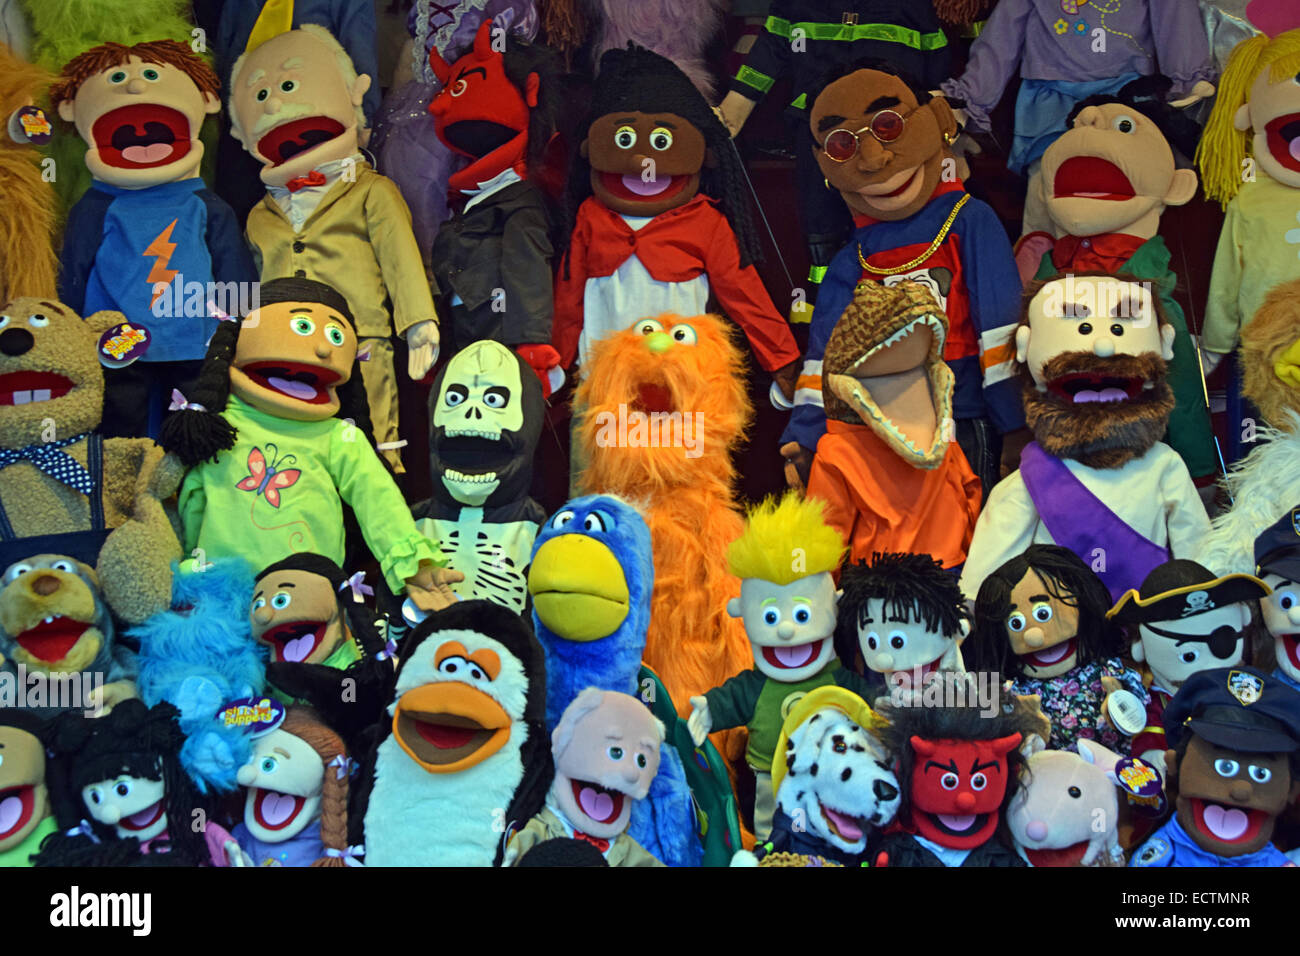 A selection of colorful hand puppets by SILLY PUPPETS for sale at a pre-Christmas market in Union Square Park in New York City Stock Photo